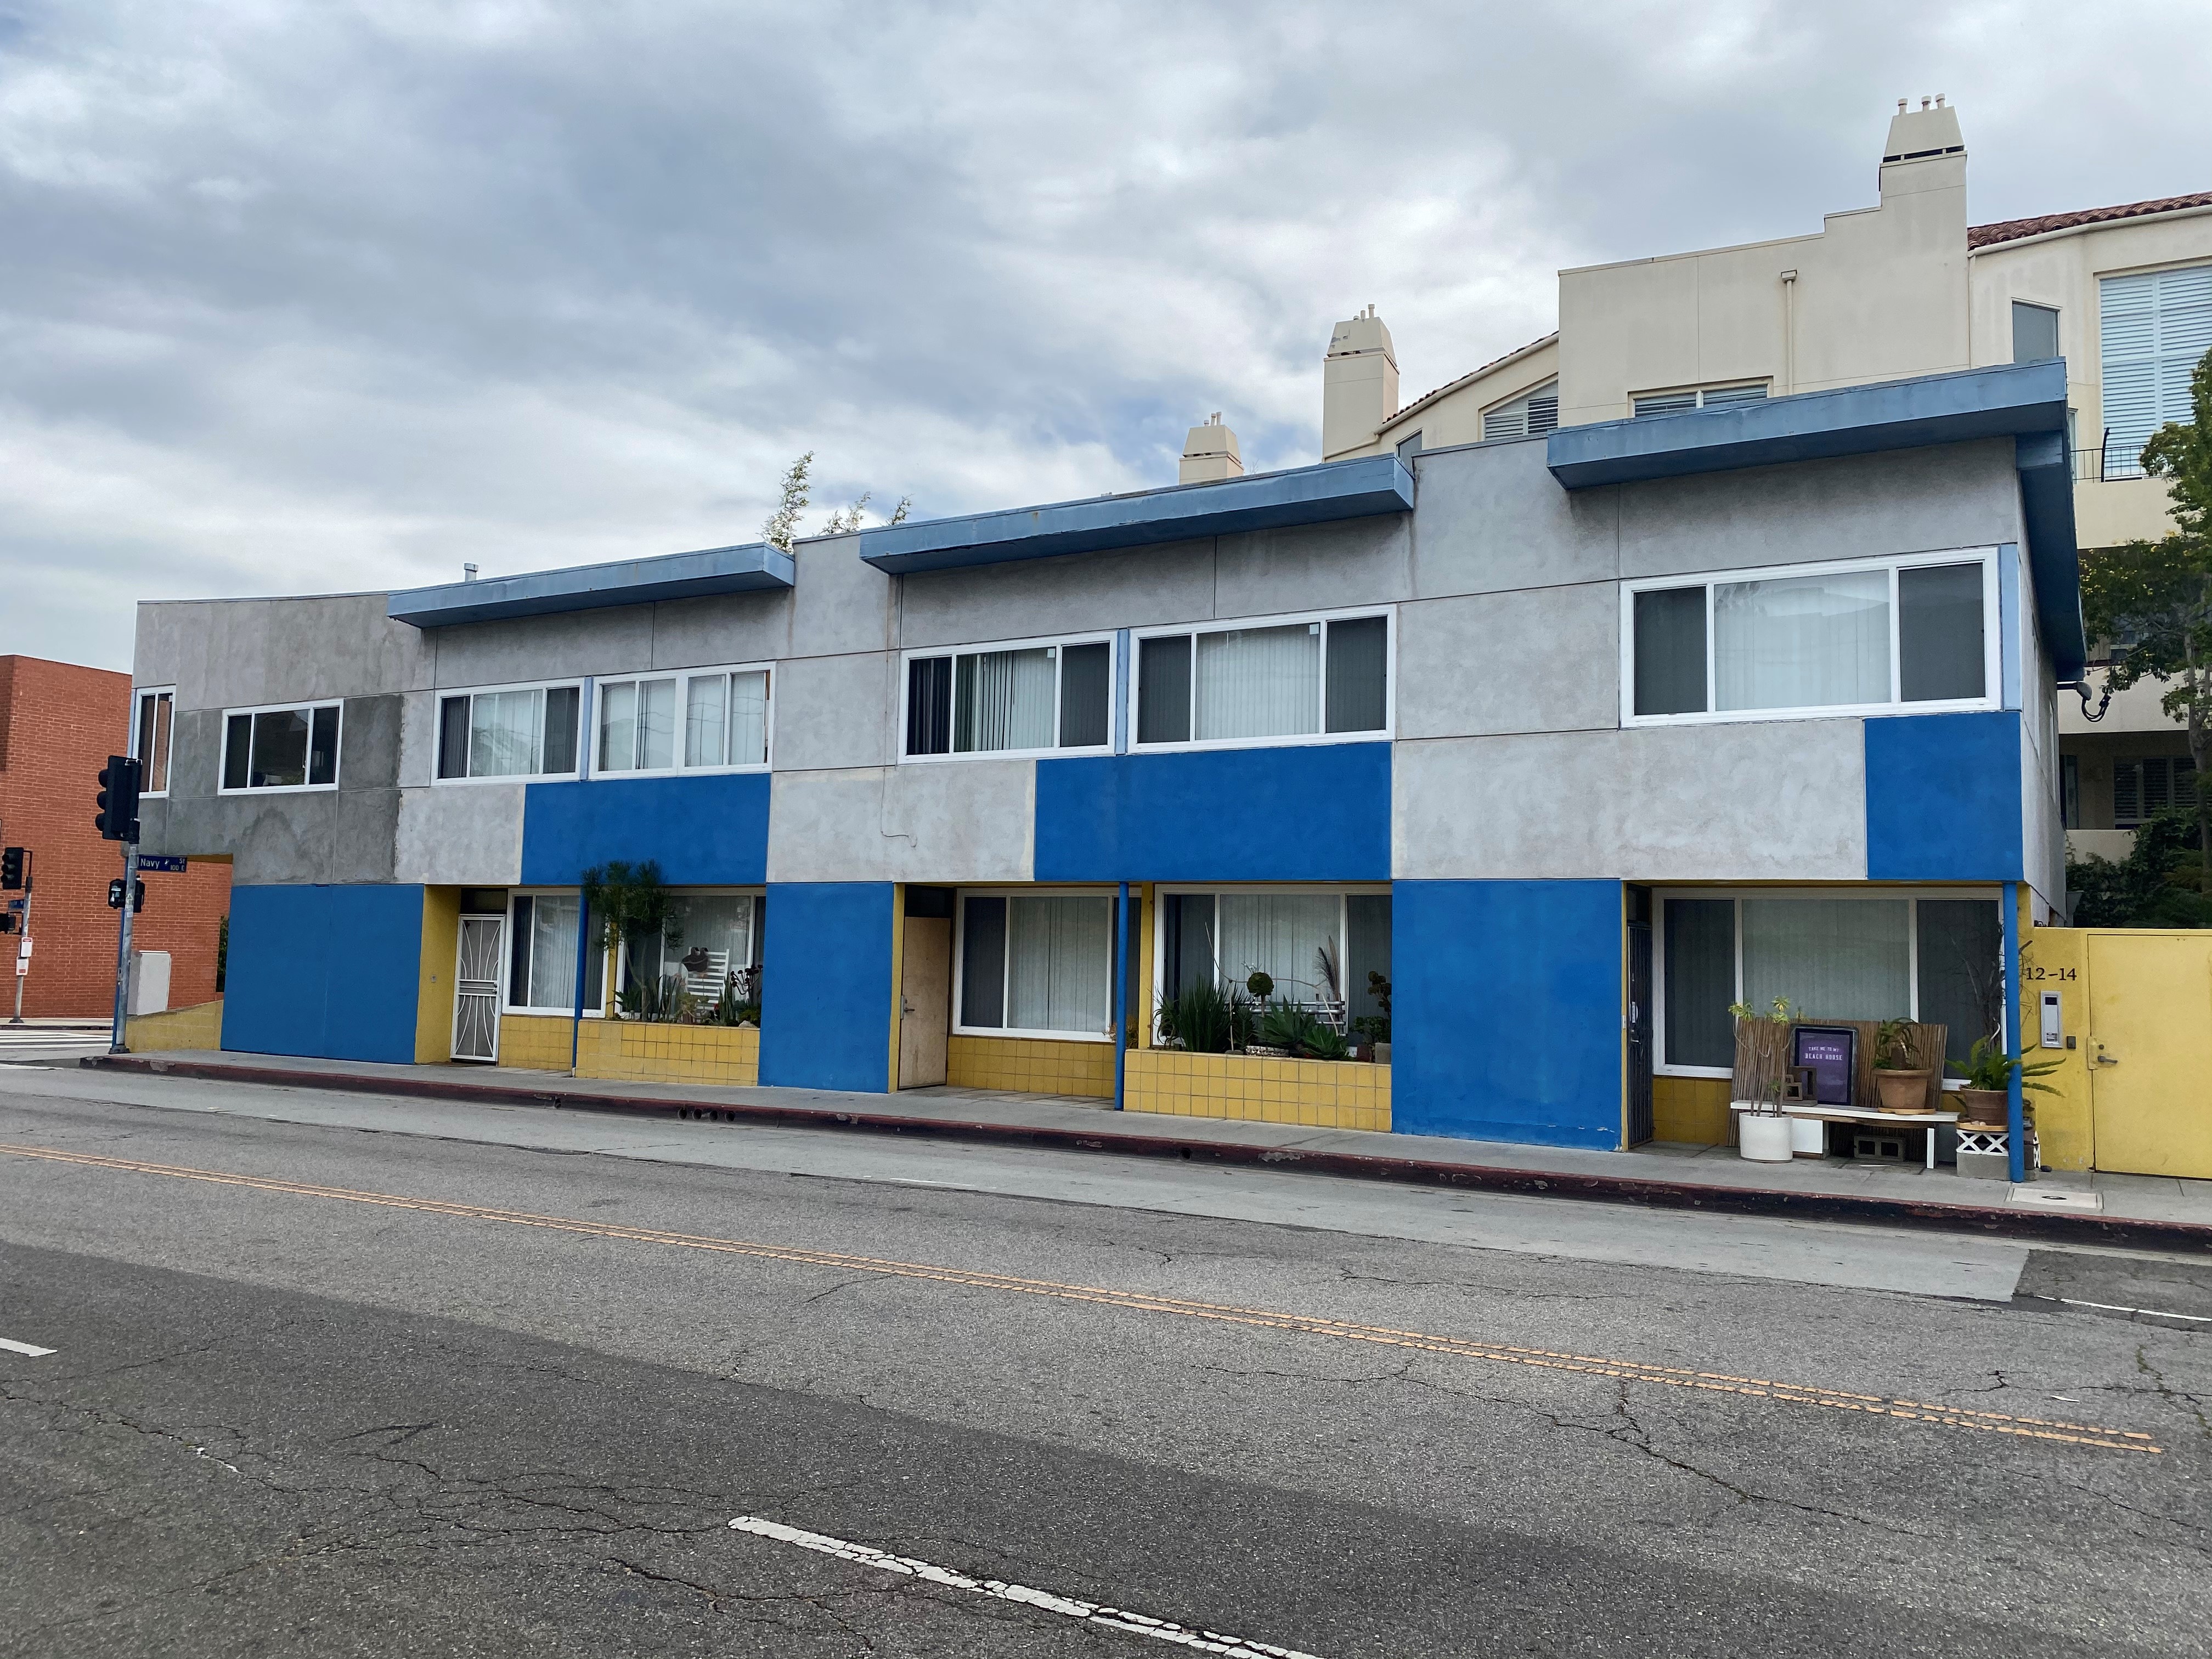 Street view of Navy Street apartments. building located on street corner. Blue and grey building with accents of yellow.